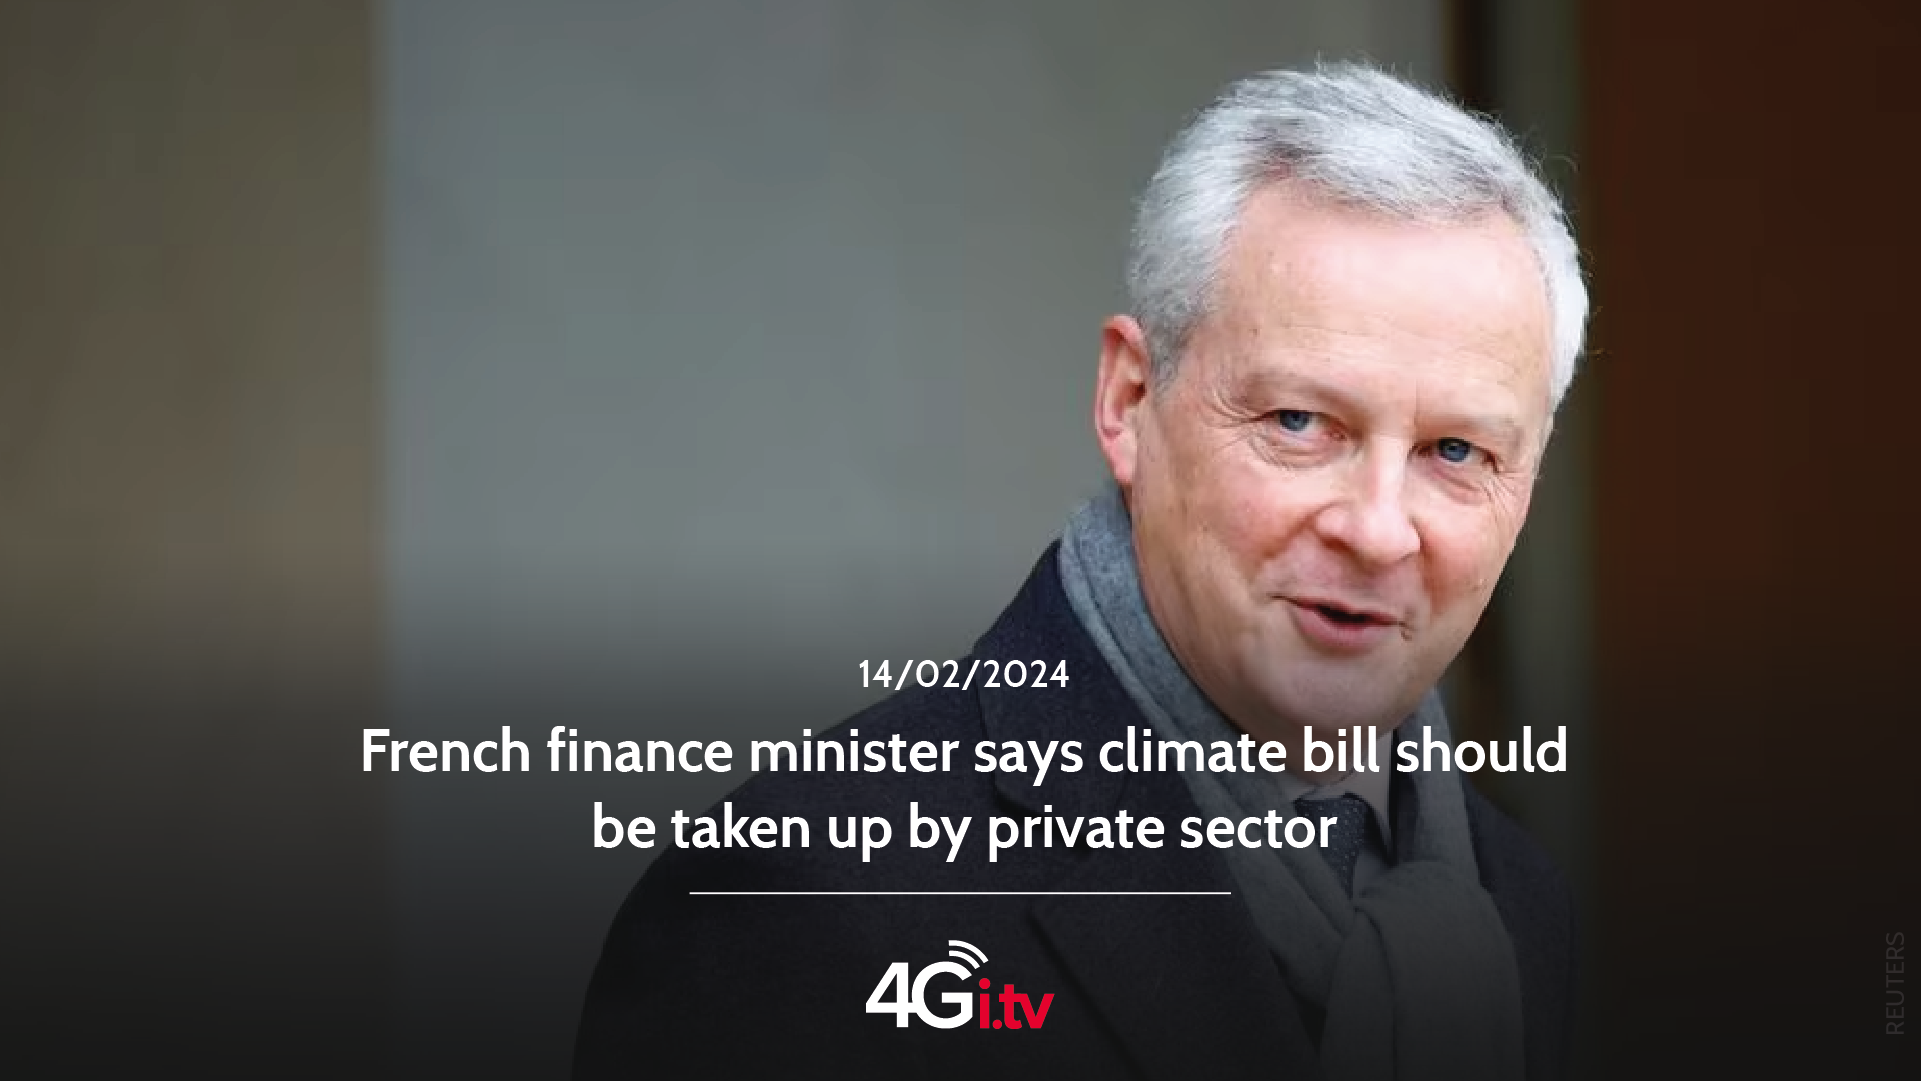 Lesen Sie mehr über den Artikel French finance minister says climate bill should be taken up by private sector 